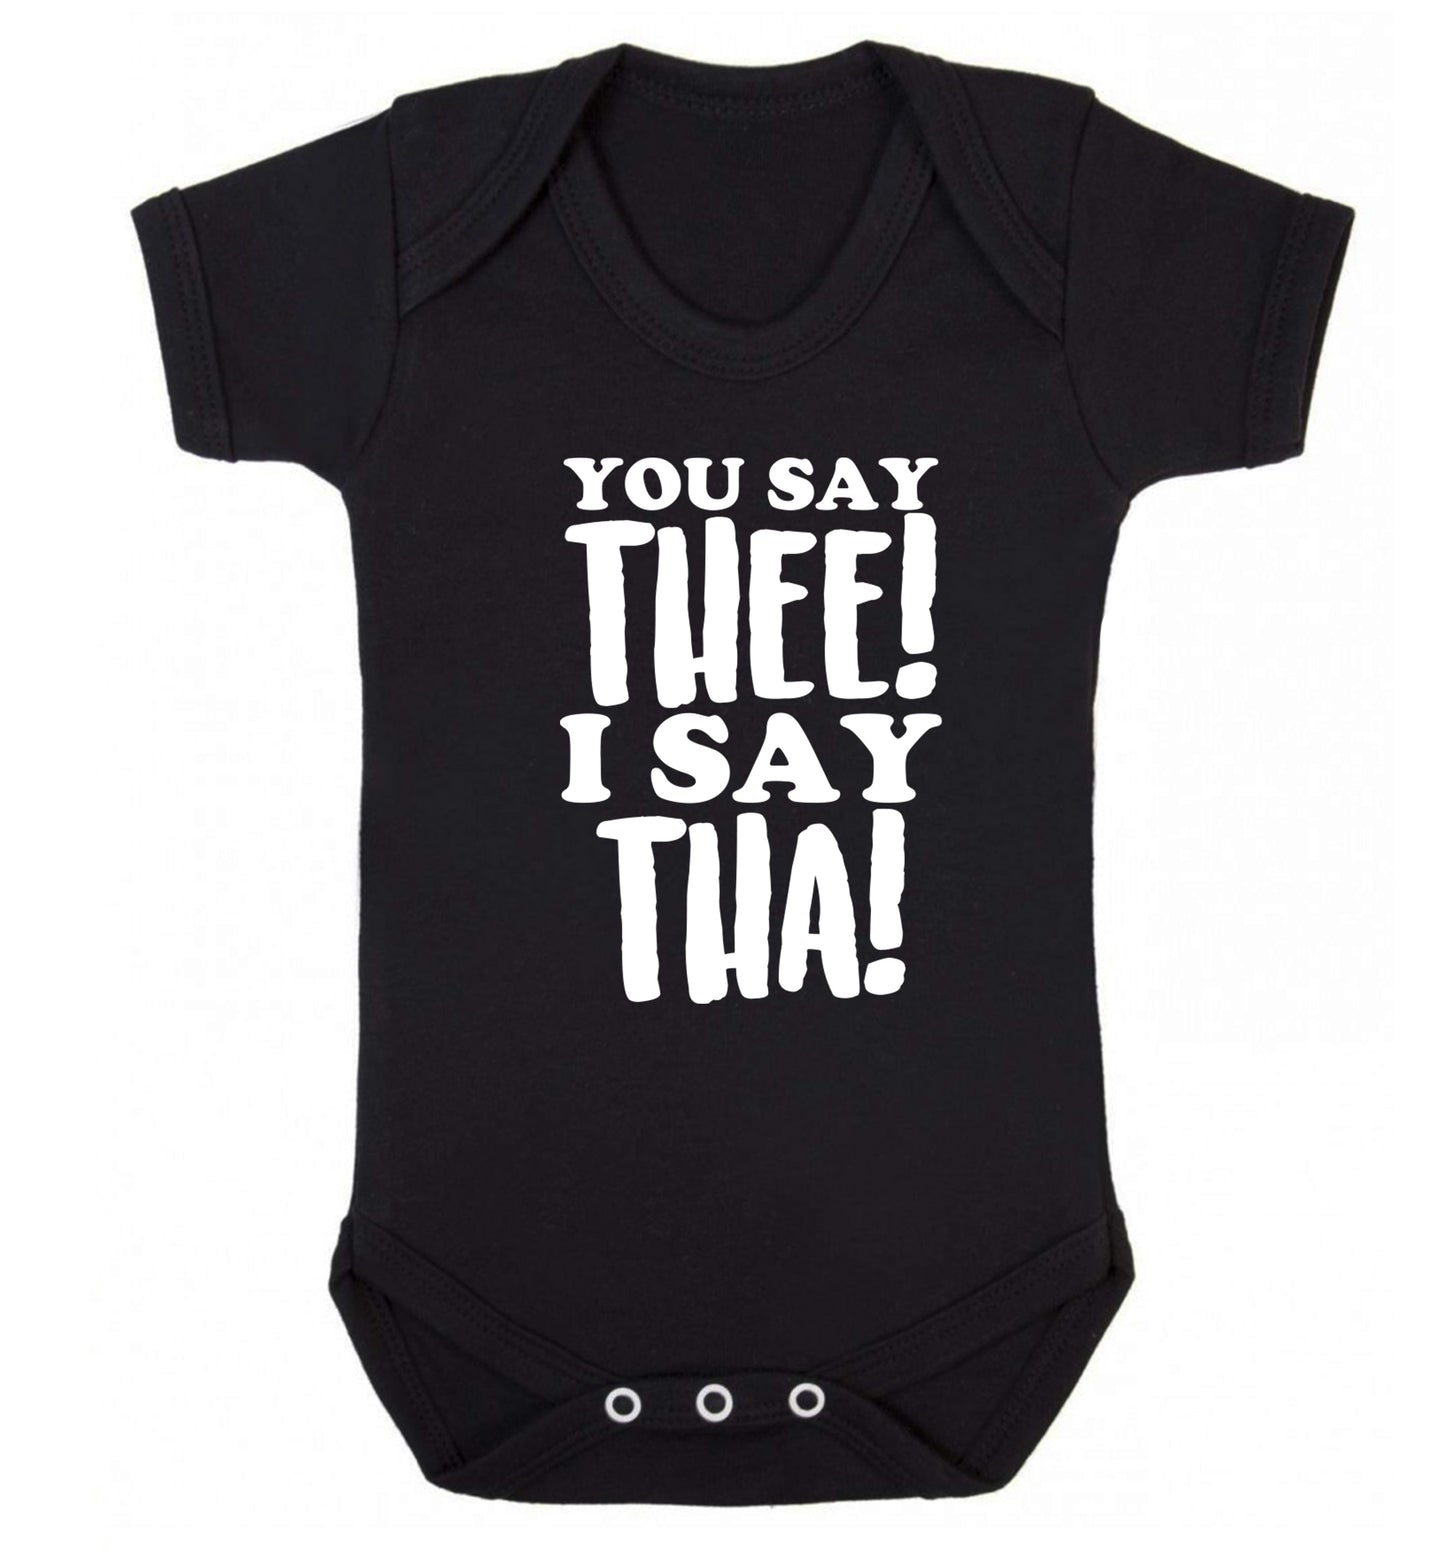 You say thee I say tha Baby Vest black 18-24 months